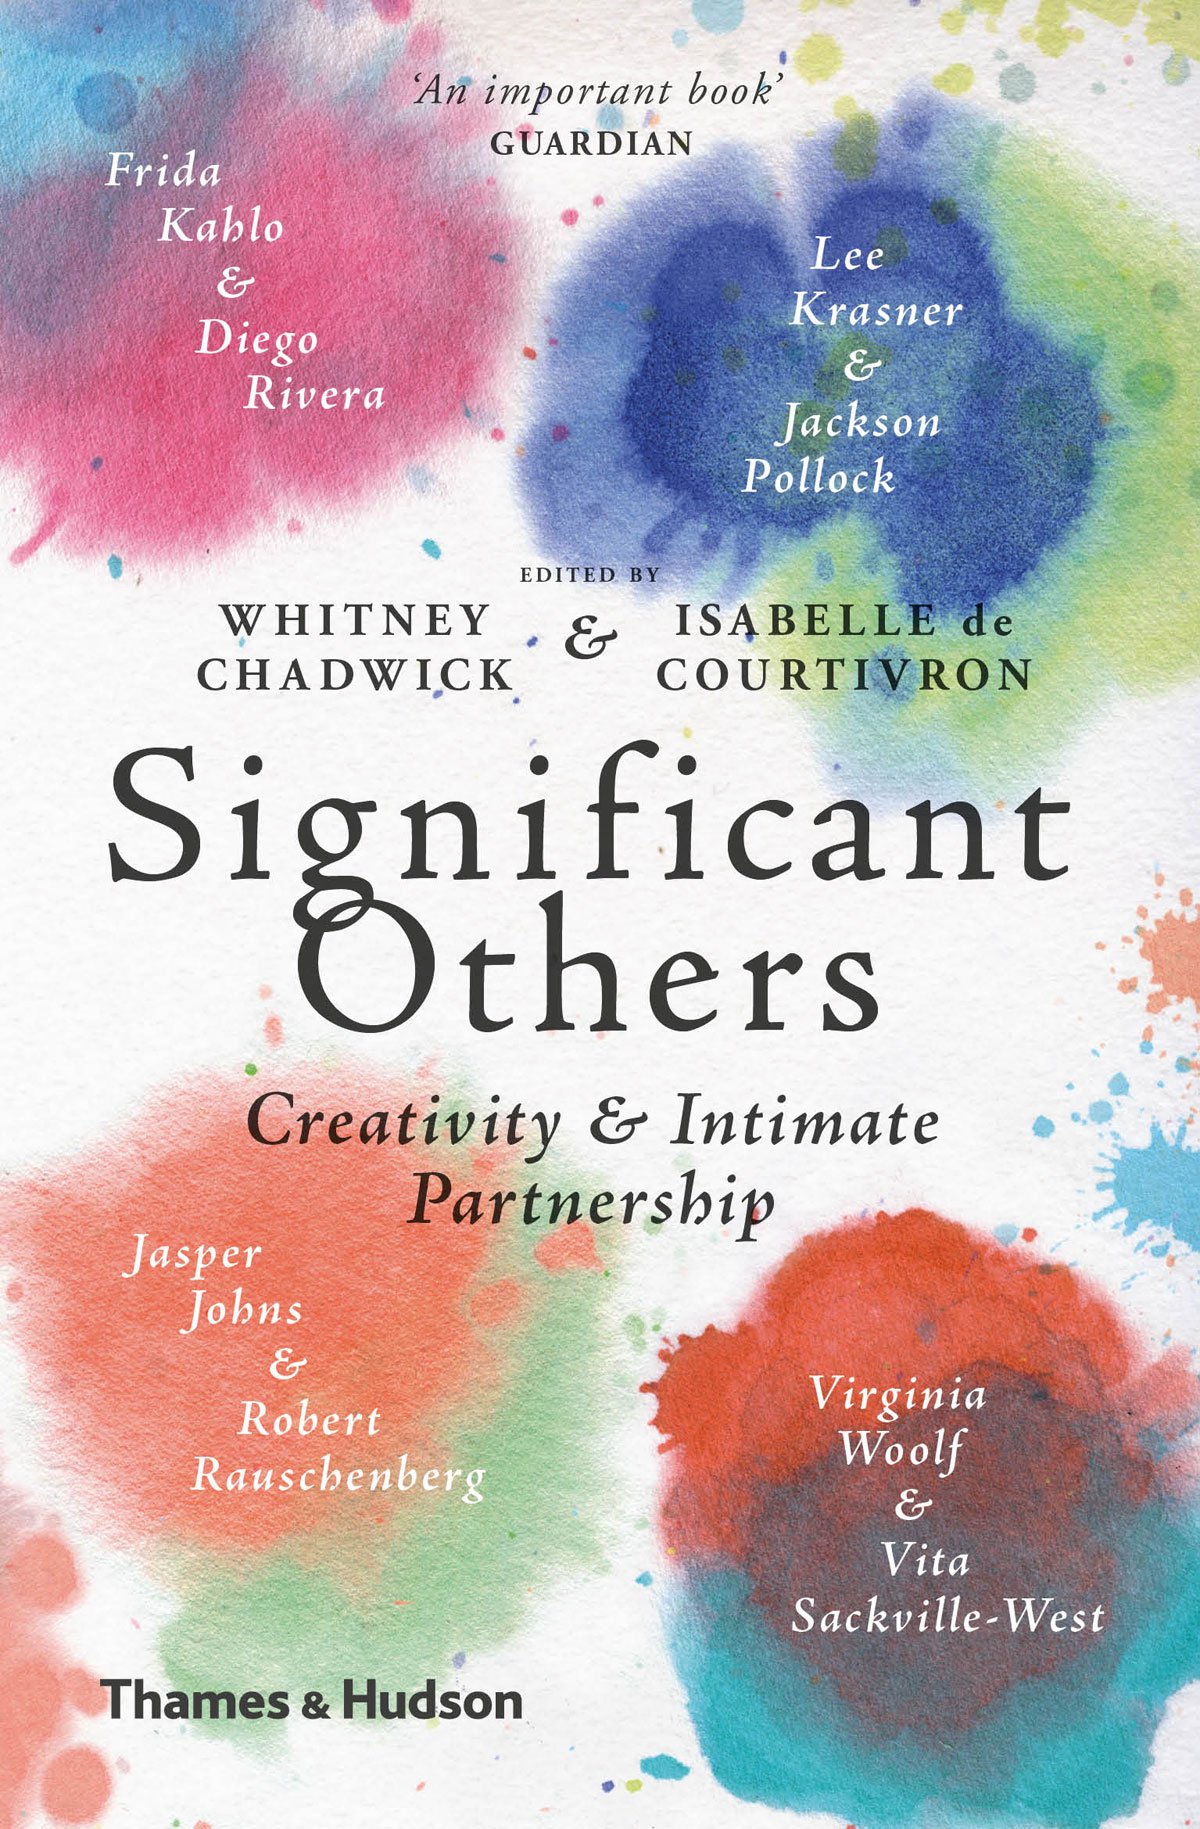 Significant Others | Whitney Chadwick, Isabelle de Courtivron